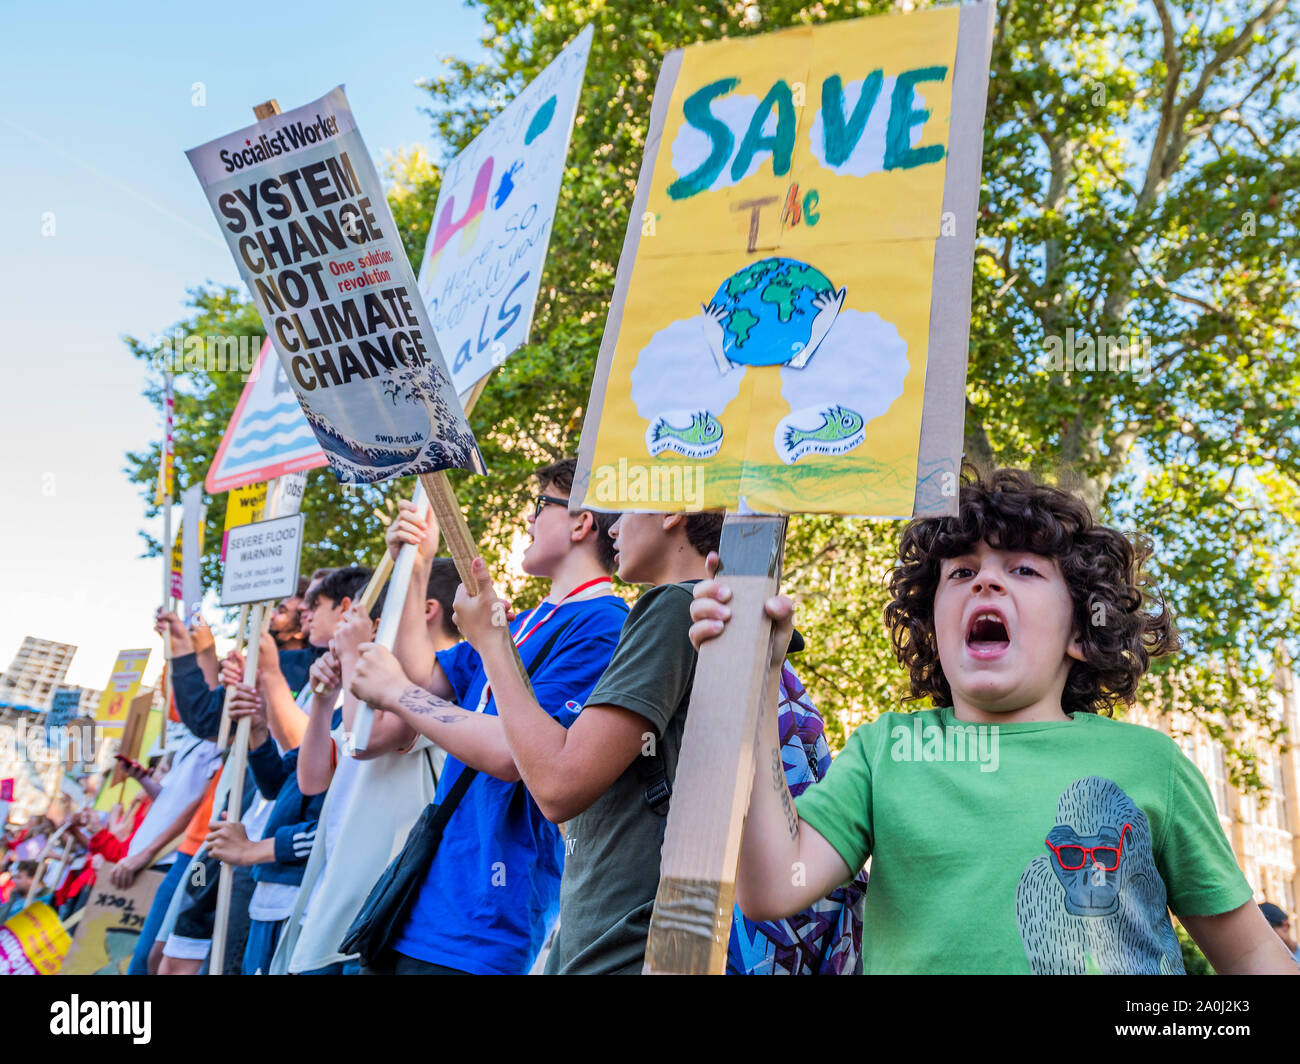 London, UK. 20th Sep, 2019. A general strike for Climate Justice, attended by school children, students and adults, is organised by Extinction Rebellion, Greenpeace, Save the Earth and other groups campaigning for the environment. They are again highlighting the climate emergency, with time running out to save the planet from a climate disaster. This is part of the ongoing ER and other protests to demand action by the UK Government on the 'climate crisis'. The action is part of an international co-ordinated protest. Credit: Guy Bell/Alamy Live News Stock Photo